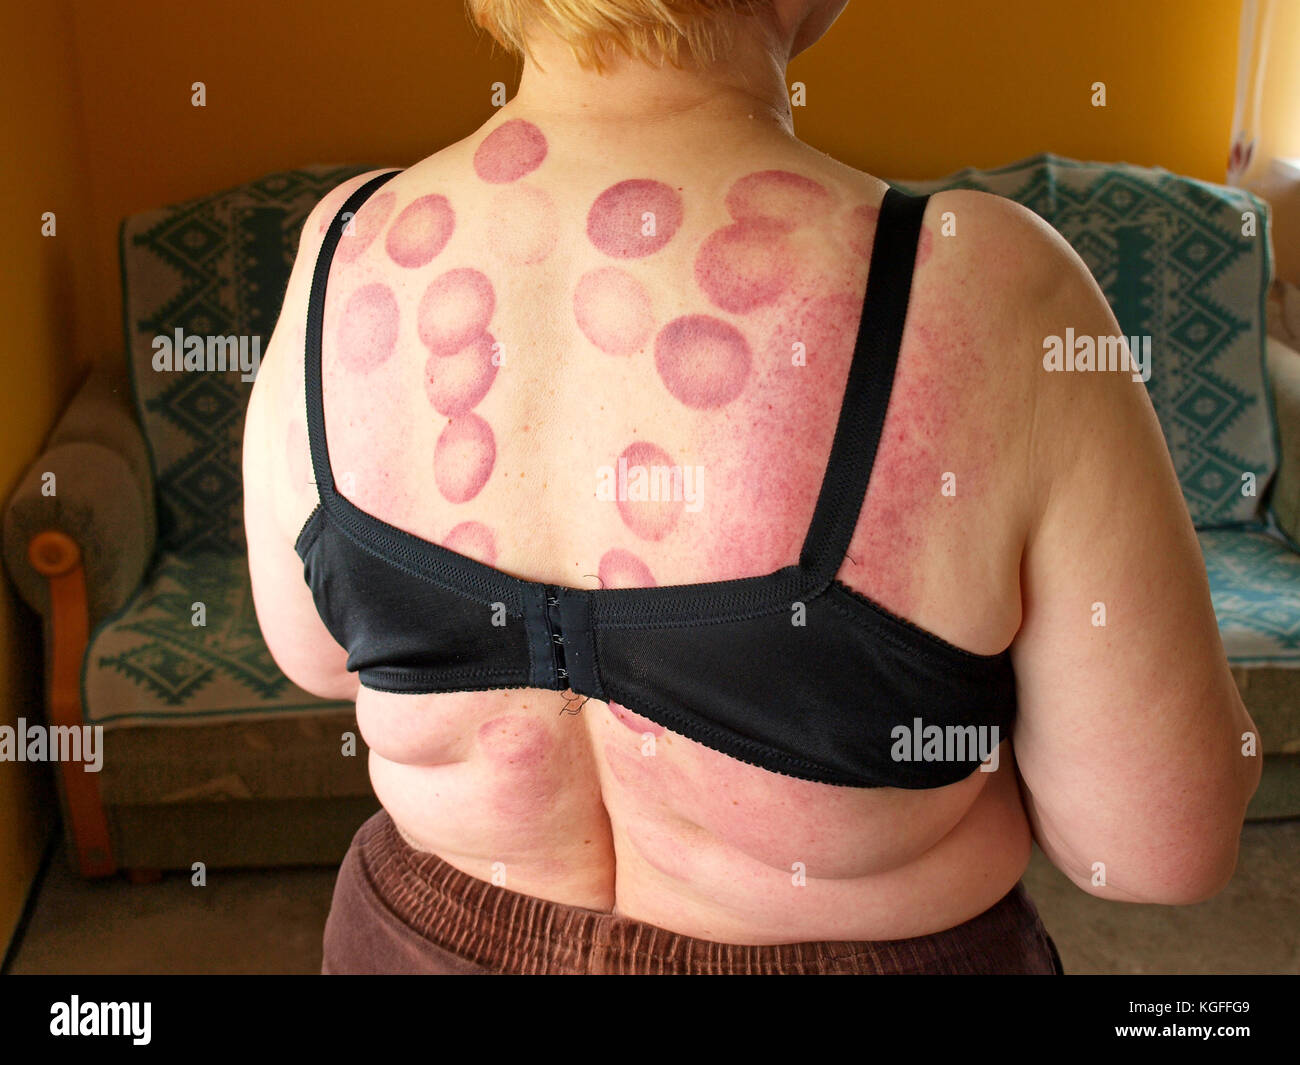 7 Signs a Skin Rash Could Indicate Something Serious